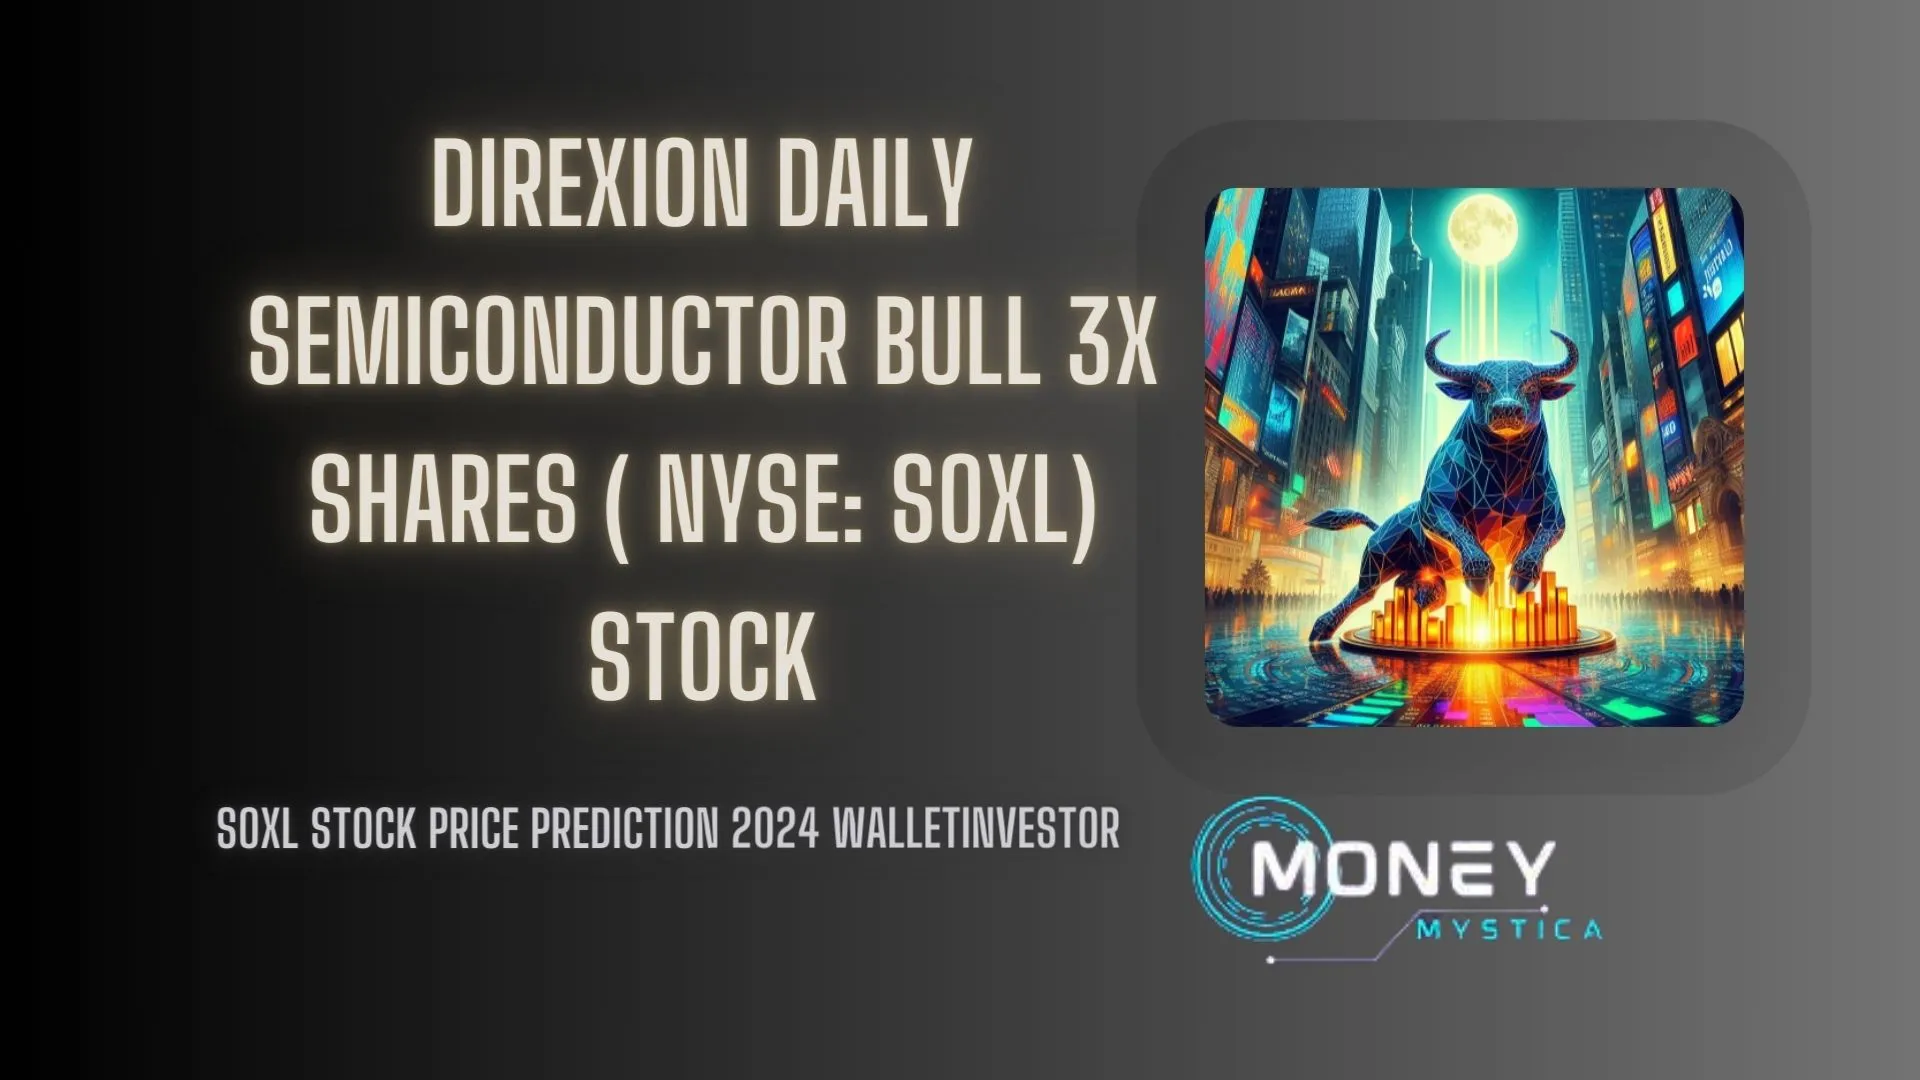 Direxion Daily Semiconductor Bull 3X Shares ( NYSE SOXL) Stock